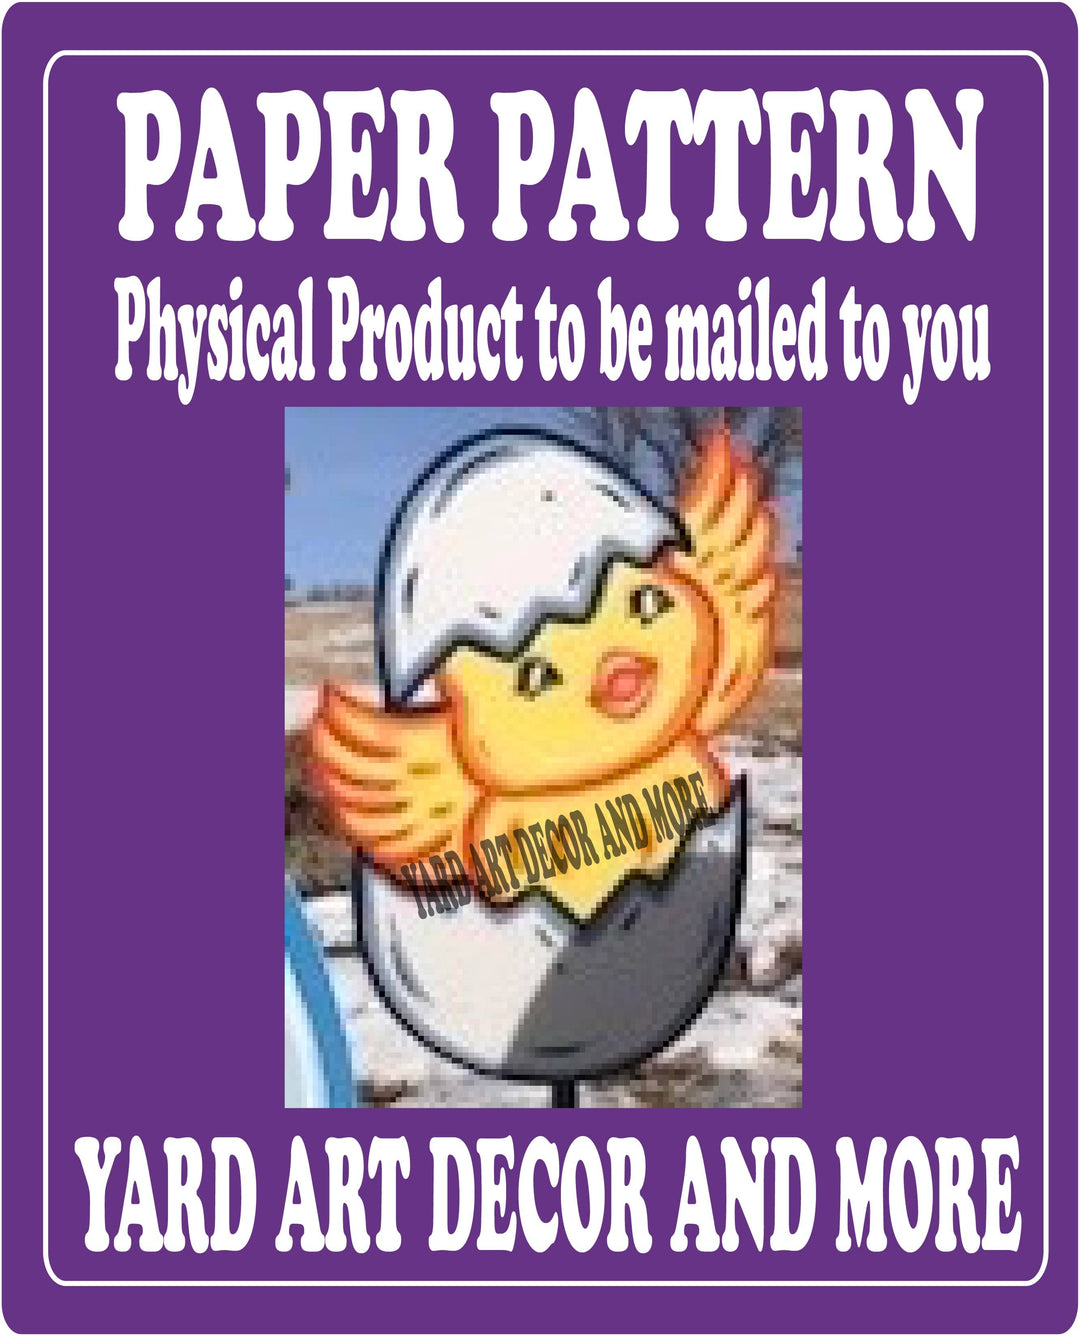 Easter Chick breaks out of egg yard art decor paper pattern